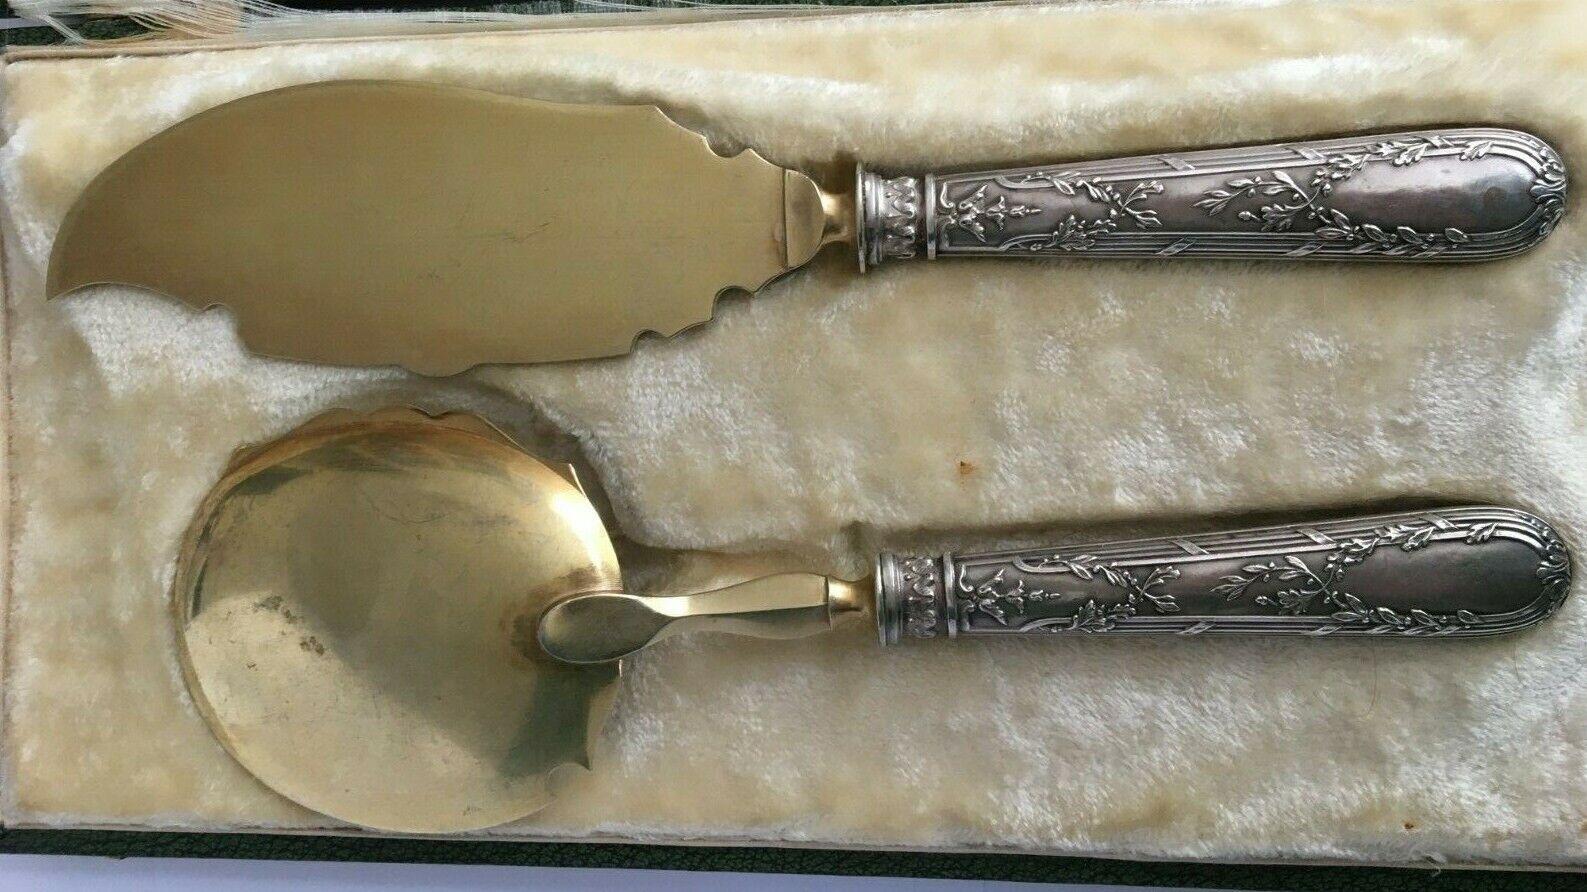 French Sterling Silver Ice Cream Dessert Servers in their Original Box

Complete two piece service, comprising of a large serving spoon and knife or slice, finely housed in the original presentation box.
The blades are beautifully embellished with